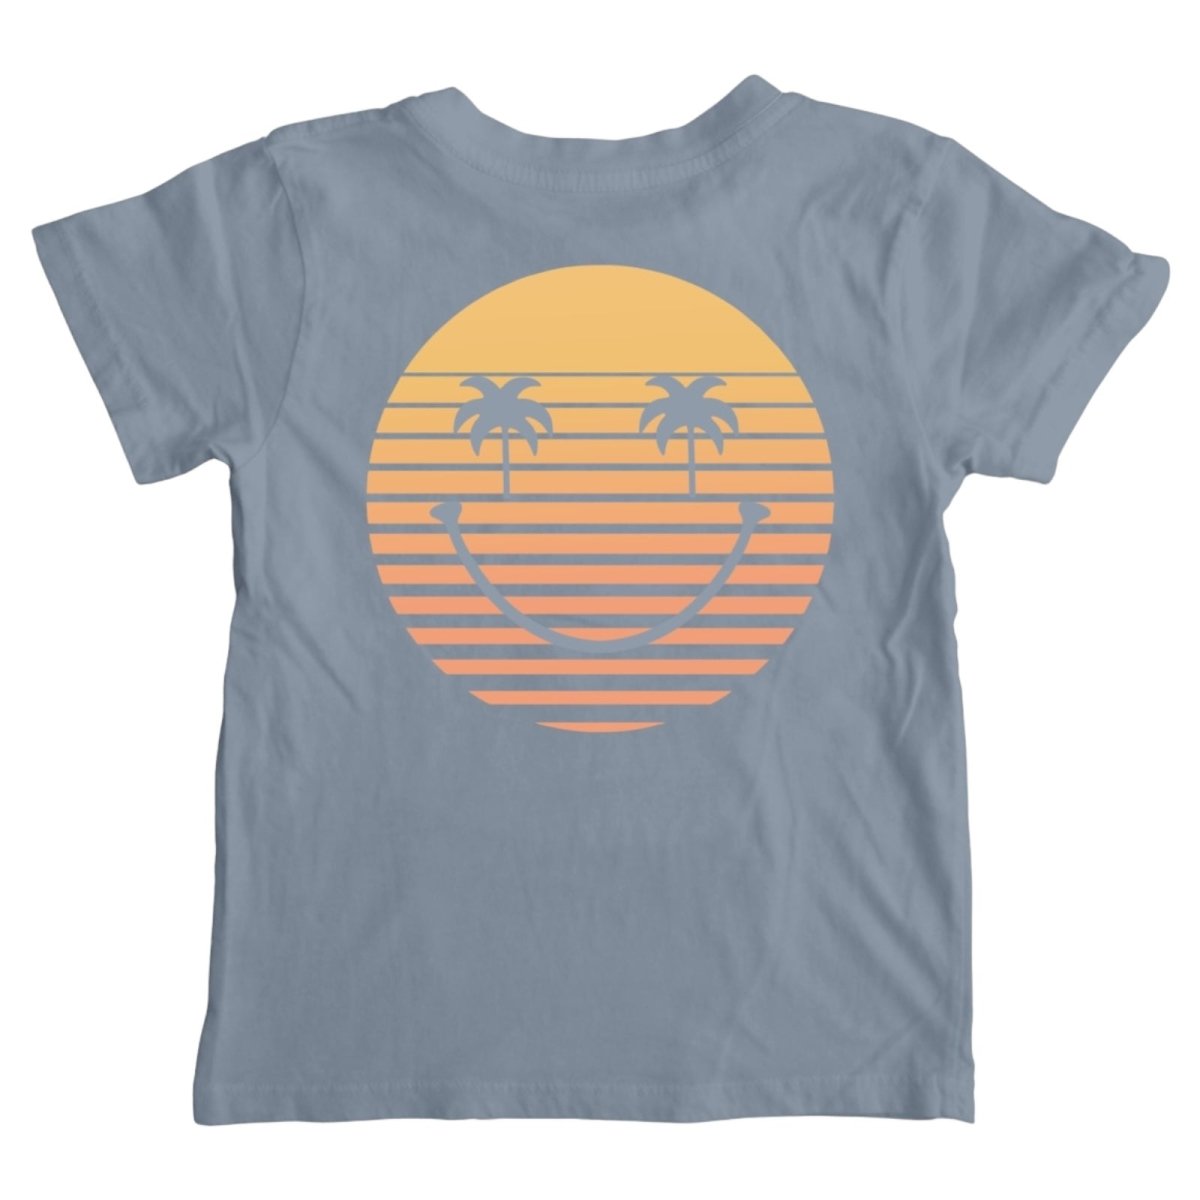 GOLDEN SMILEY FACE SUNSET TSHIRT - TINY WHALES